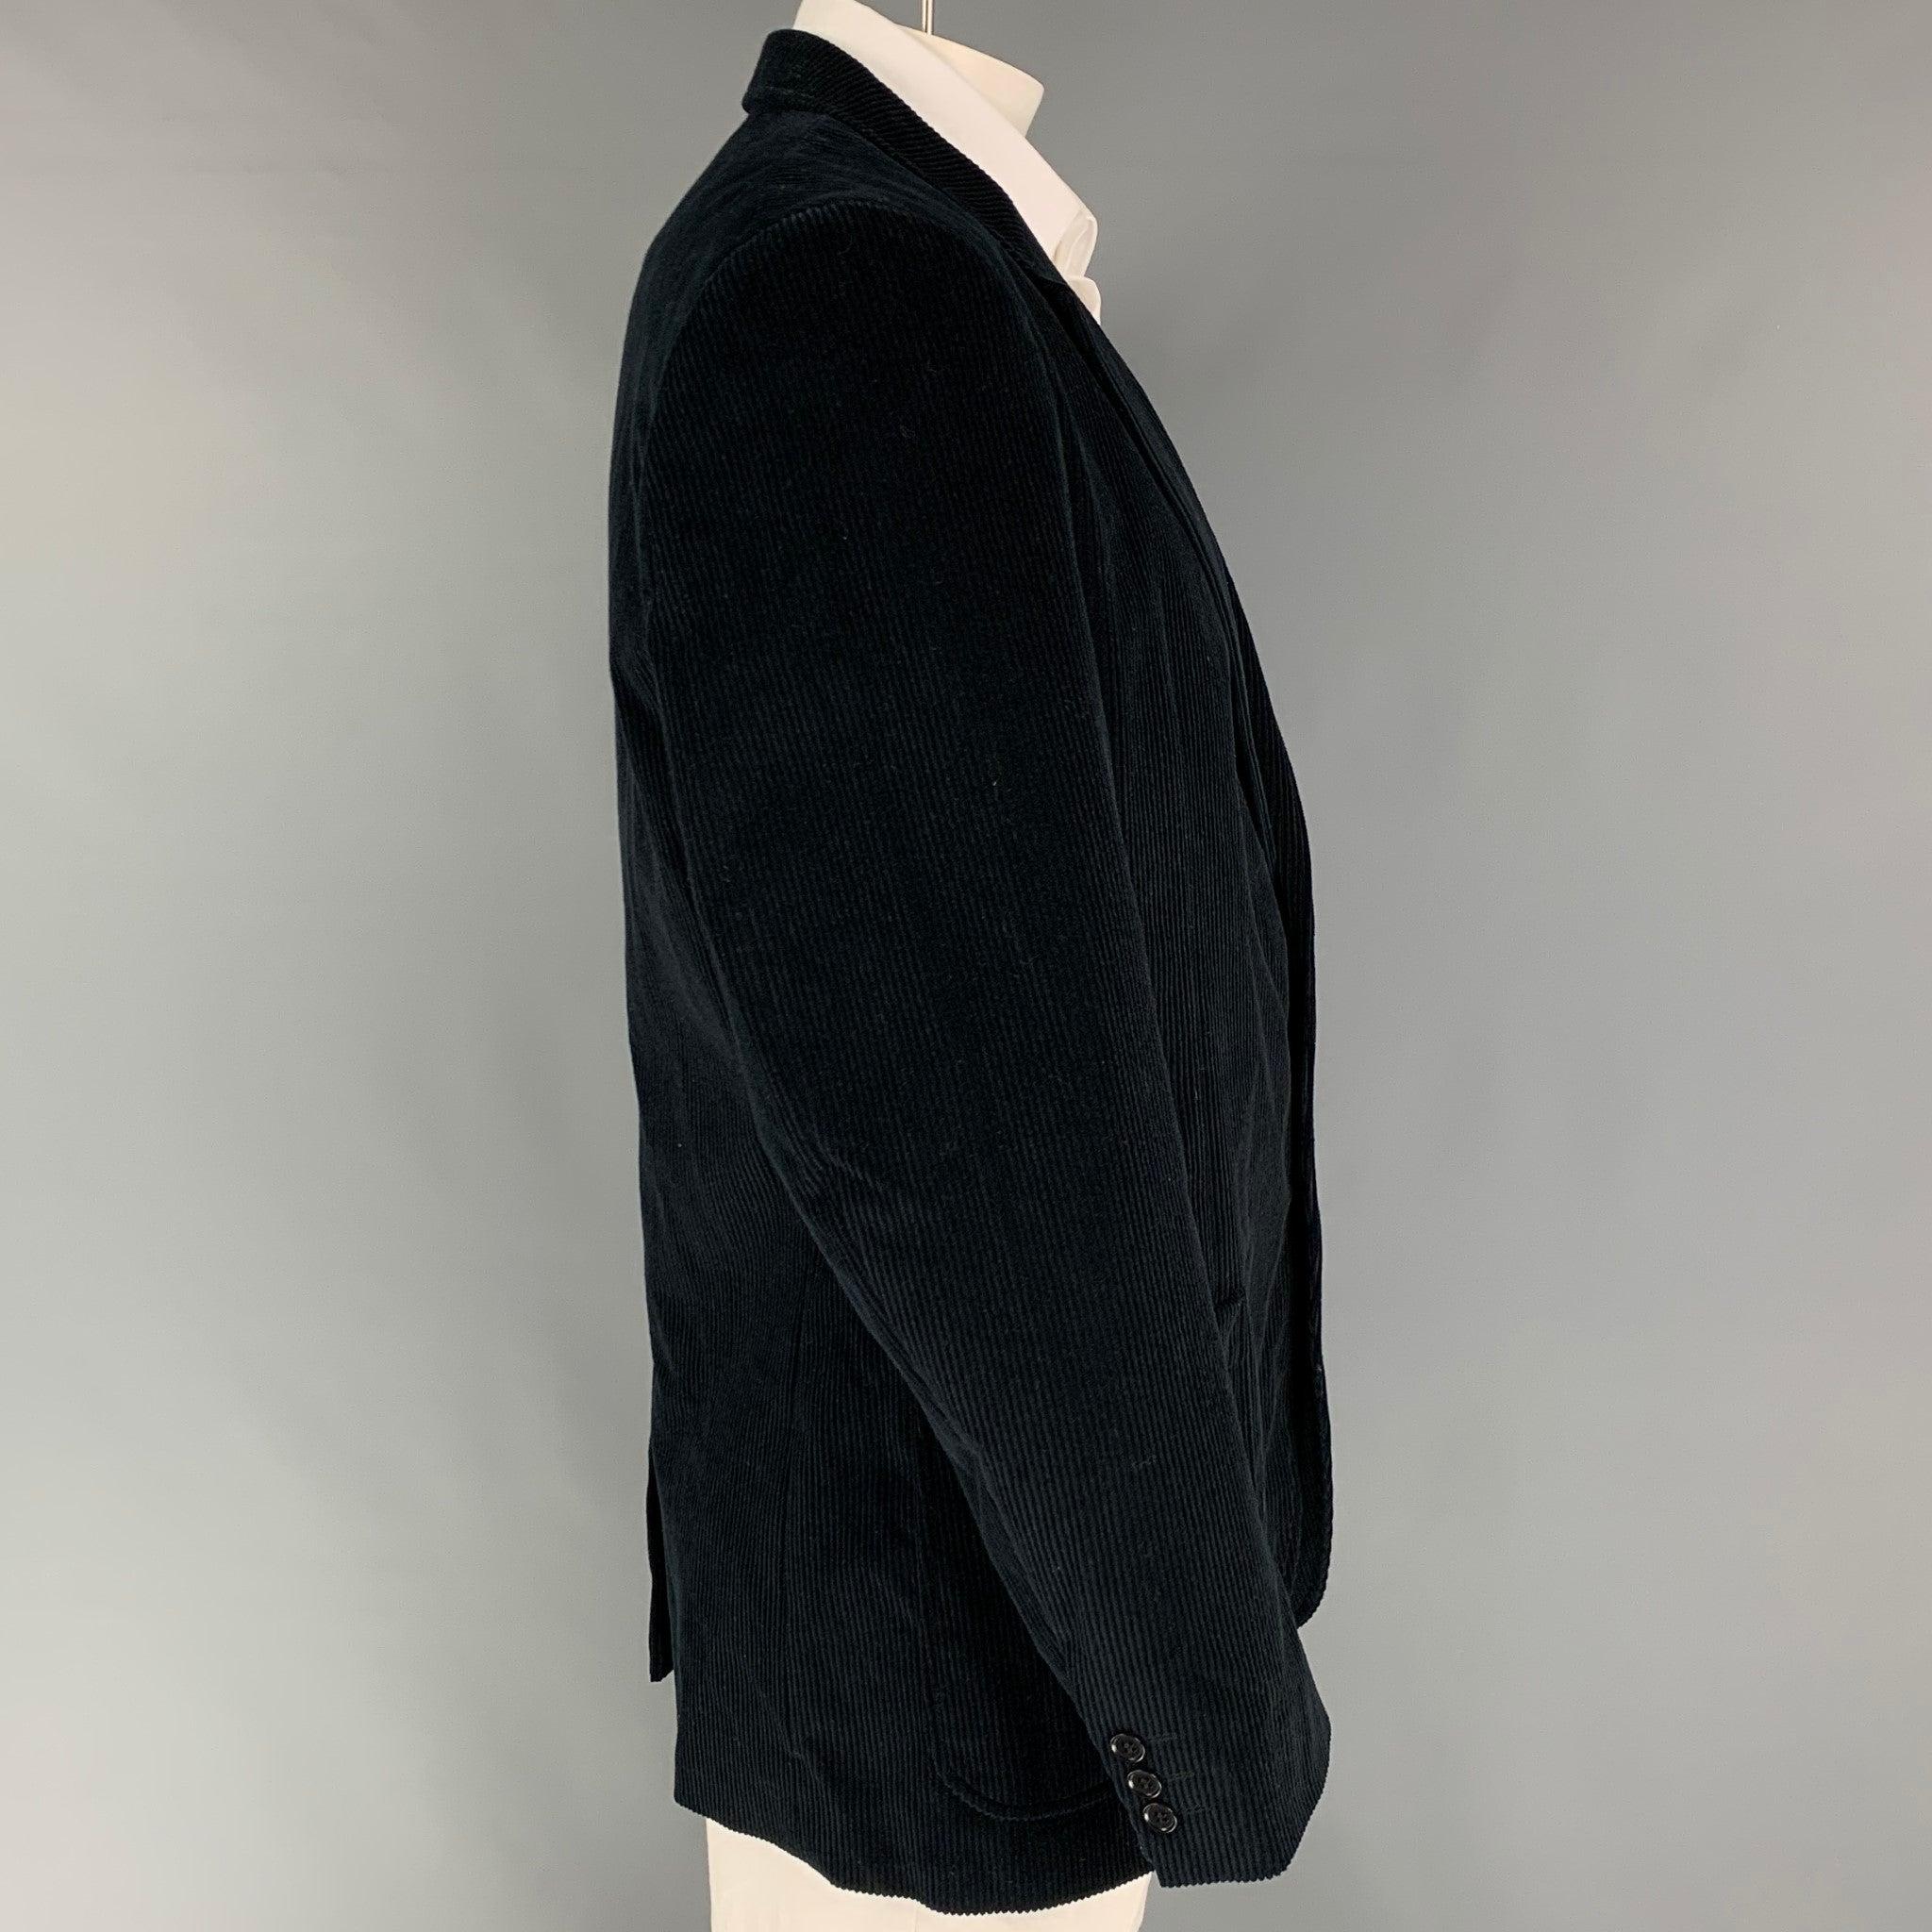 CALVIN KLEIN sport coat comes in a black corduroy cotton with a full liner featuring a notch lapel, patch pockets, single back vent, and a double button closure. Made in Italy.
Very Good
Pre-Owned Condition.  

Marked:   54-42/43 

Measurements: 
